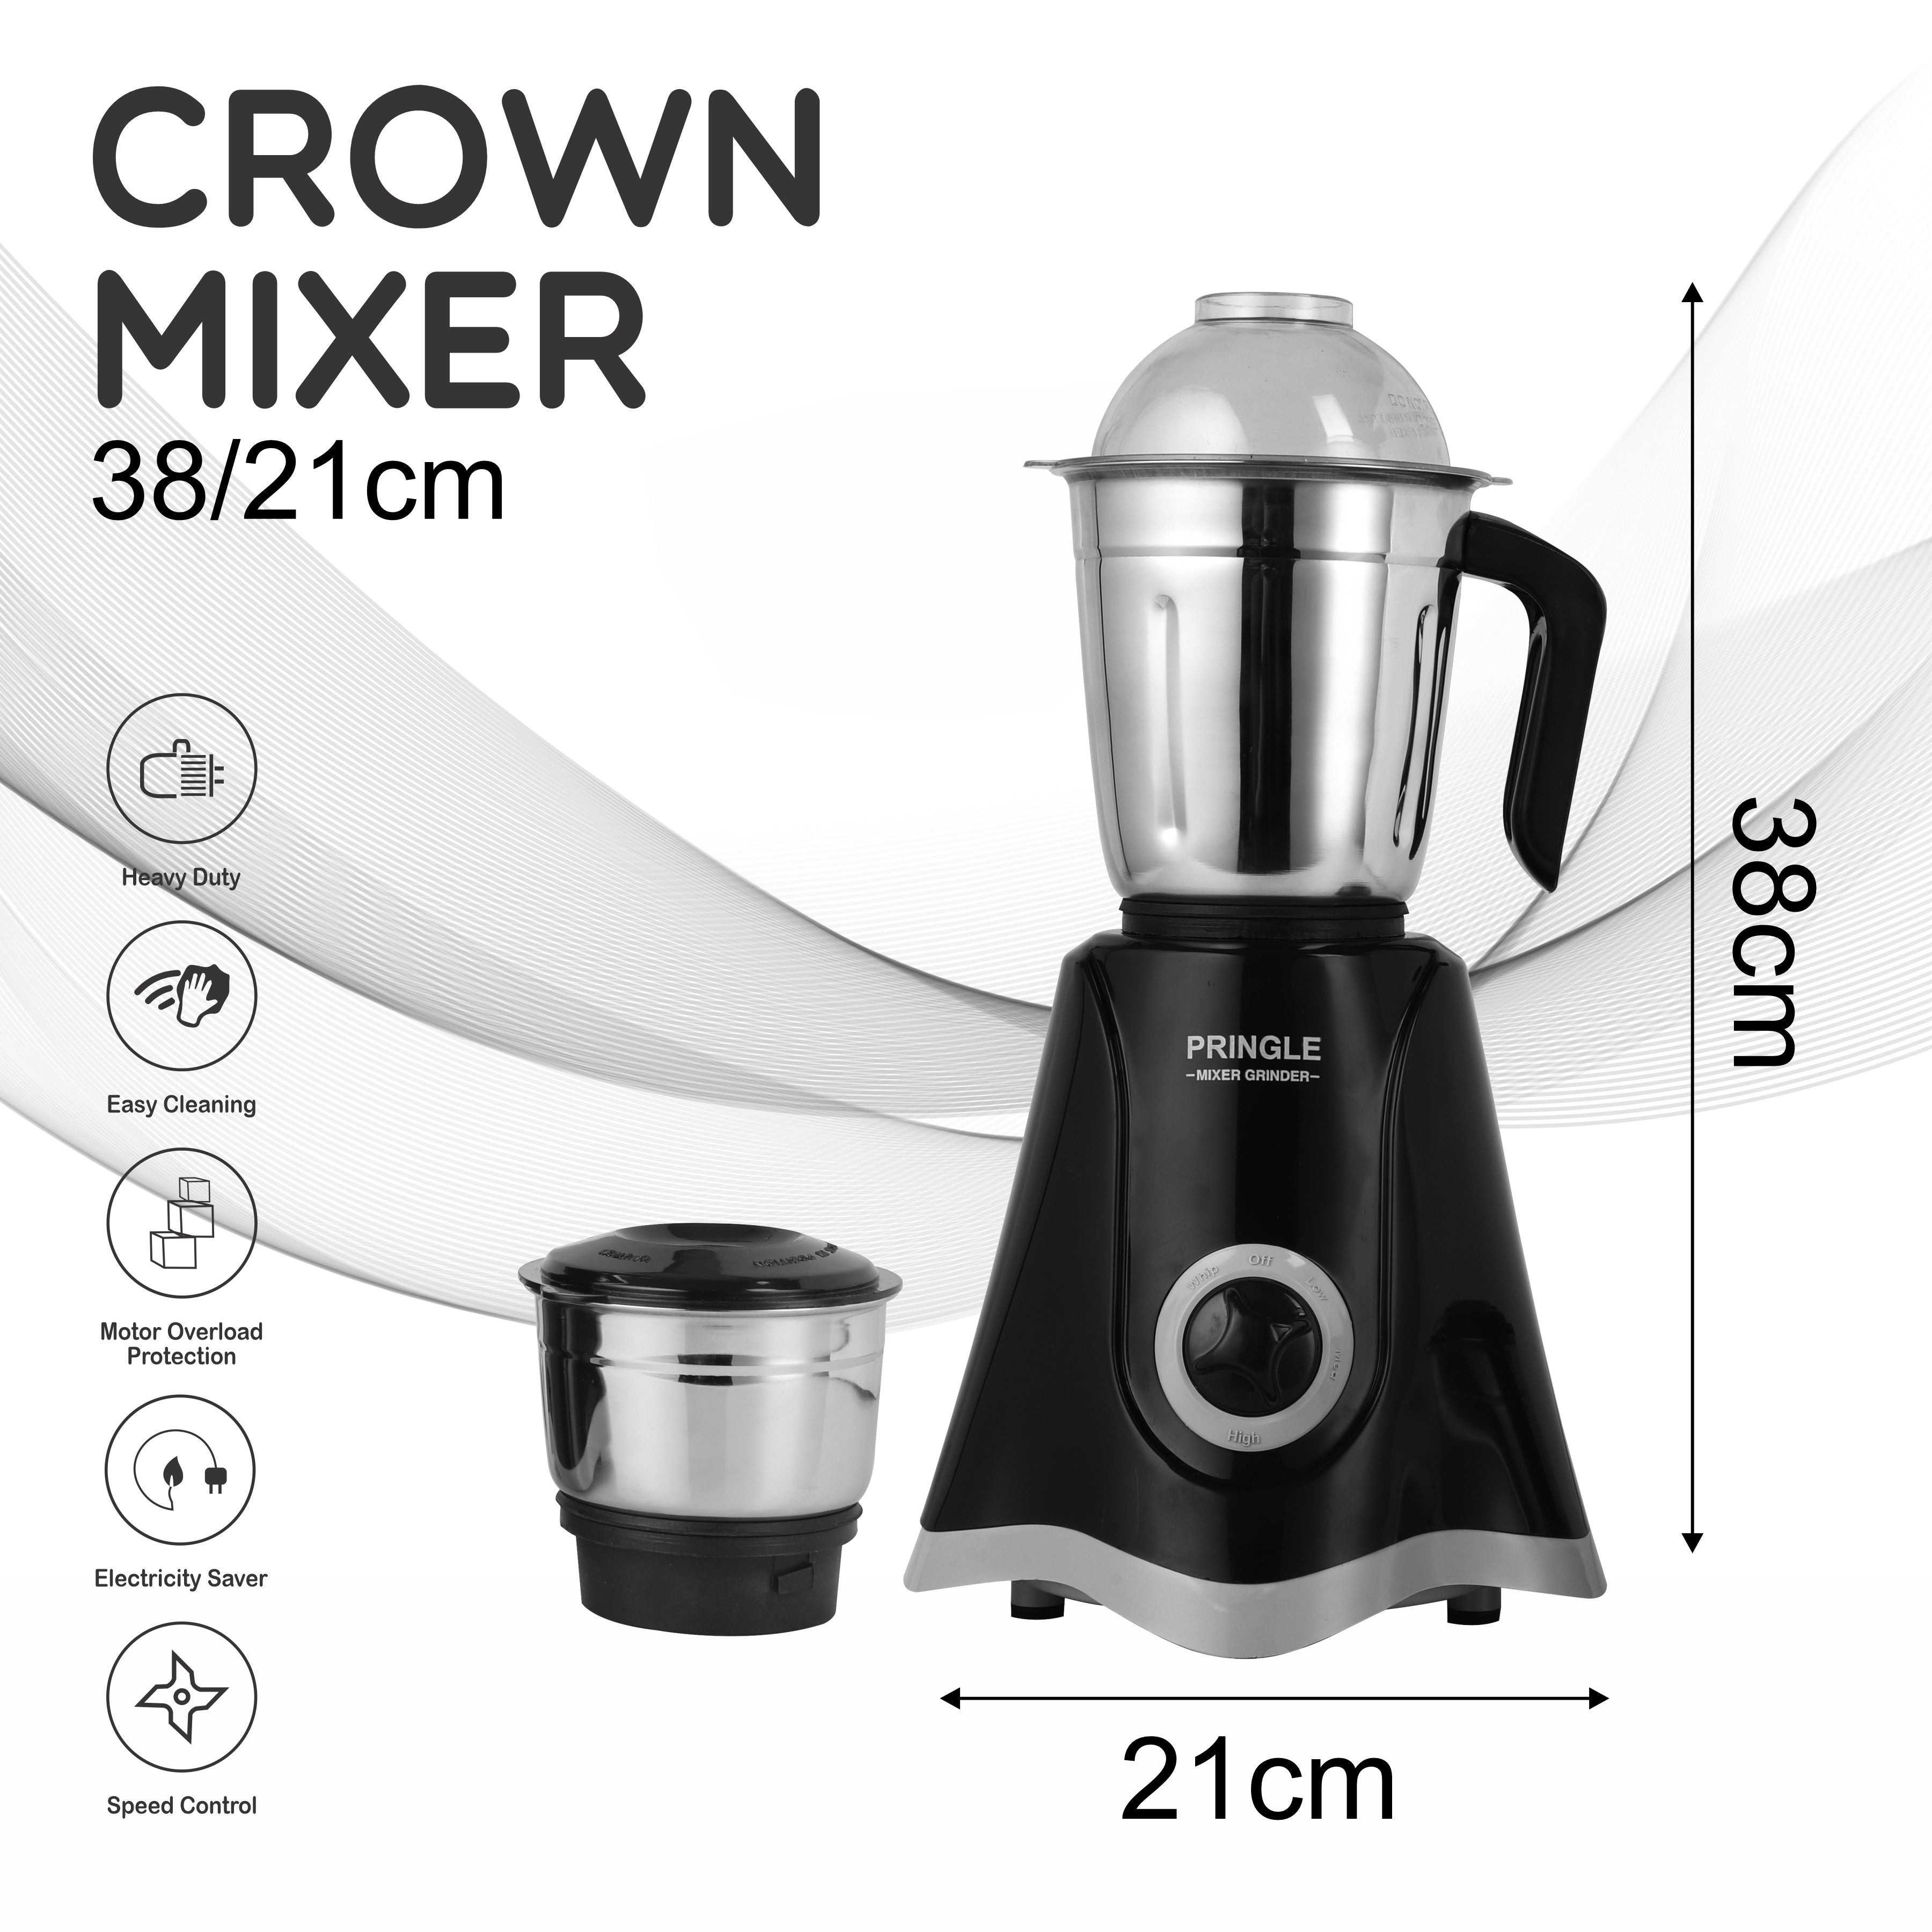 Pringle 2 Jar Mixer Grinder| 500W Powerful Motor | [ISI] Certified | 304 Grade Stainless Steel Blade| 2 Stainless Steel Jars Liquidizing Jar (1 Litres) Chutney Jar (0.4 Litres)3 Speed Options with Whip (1 Year Warranty)